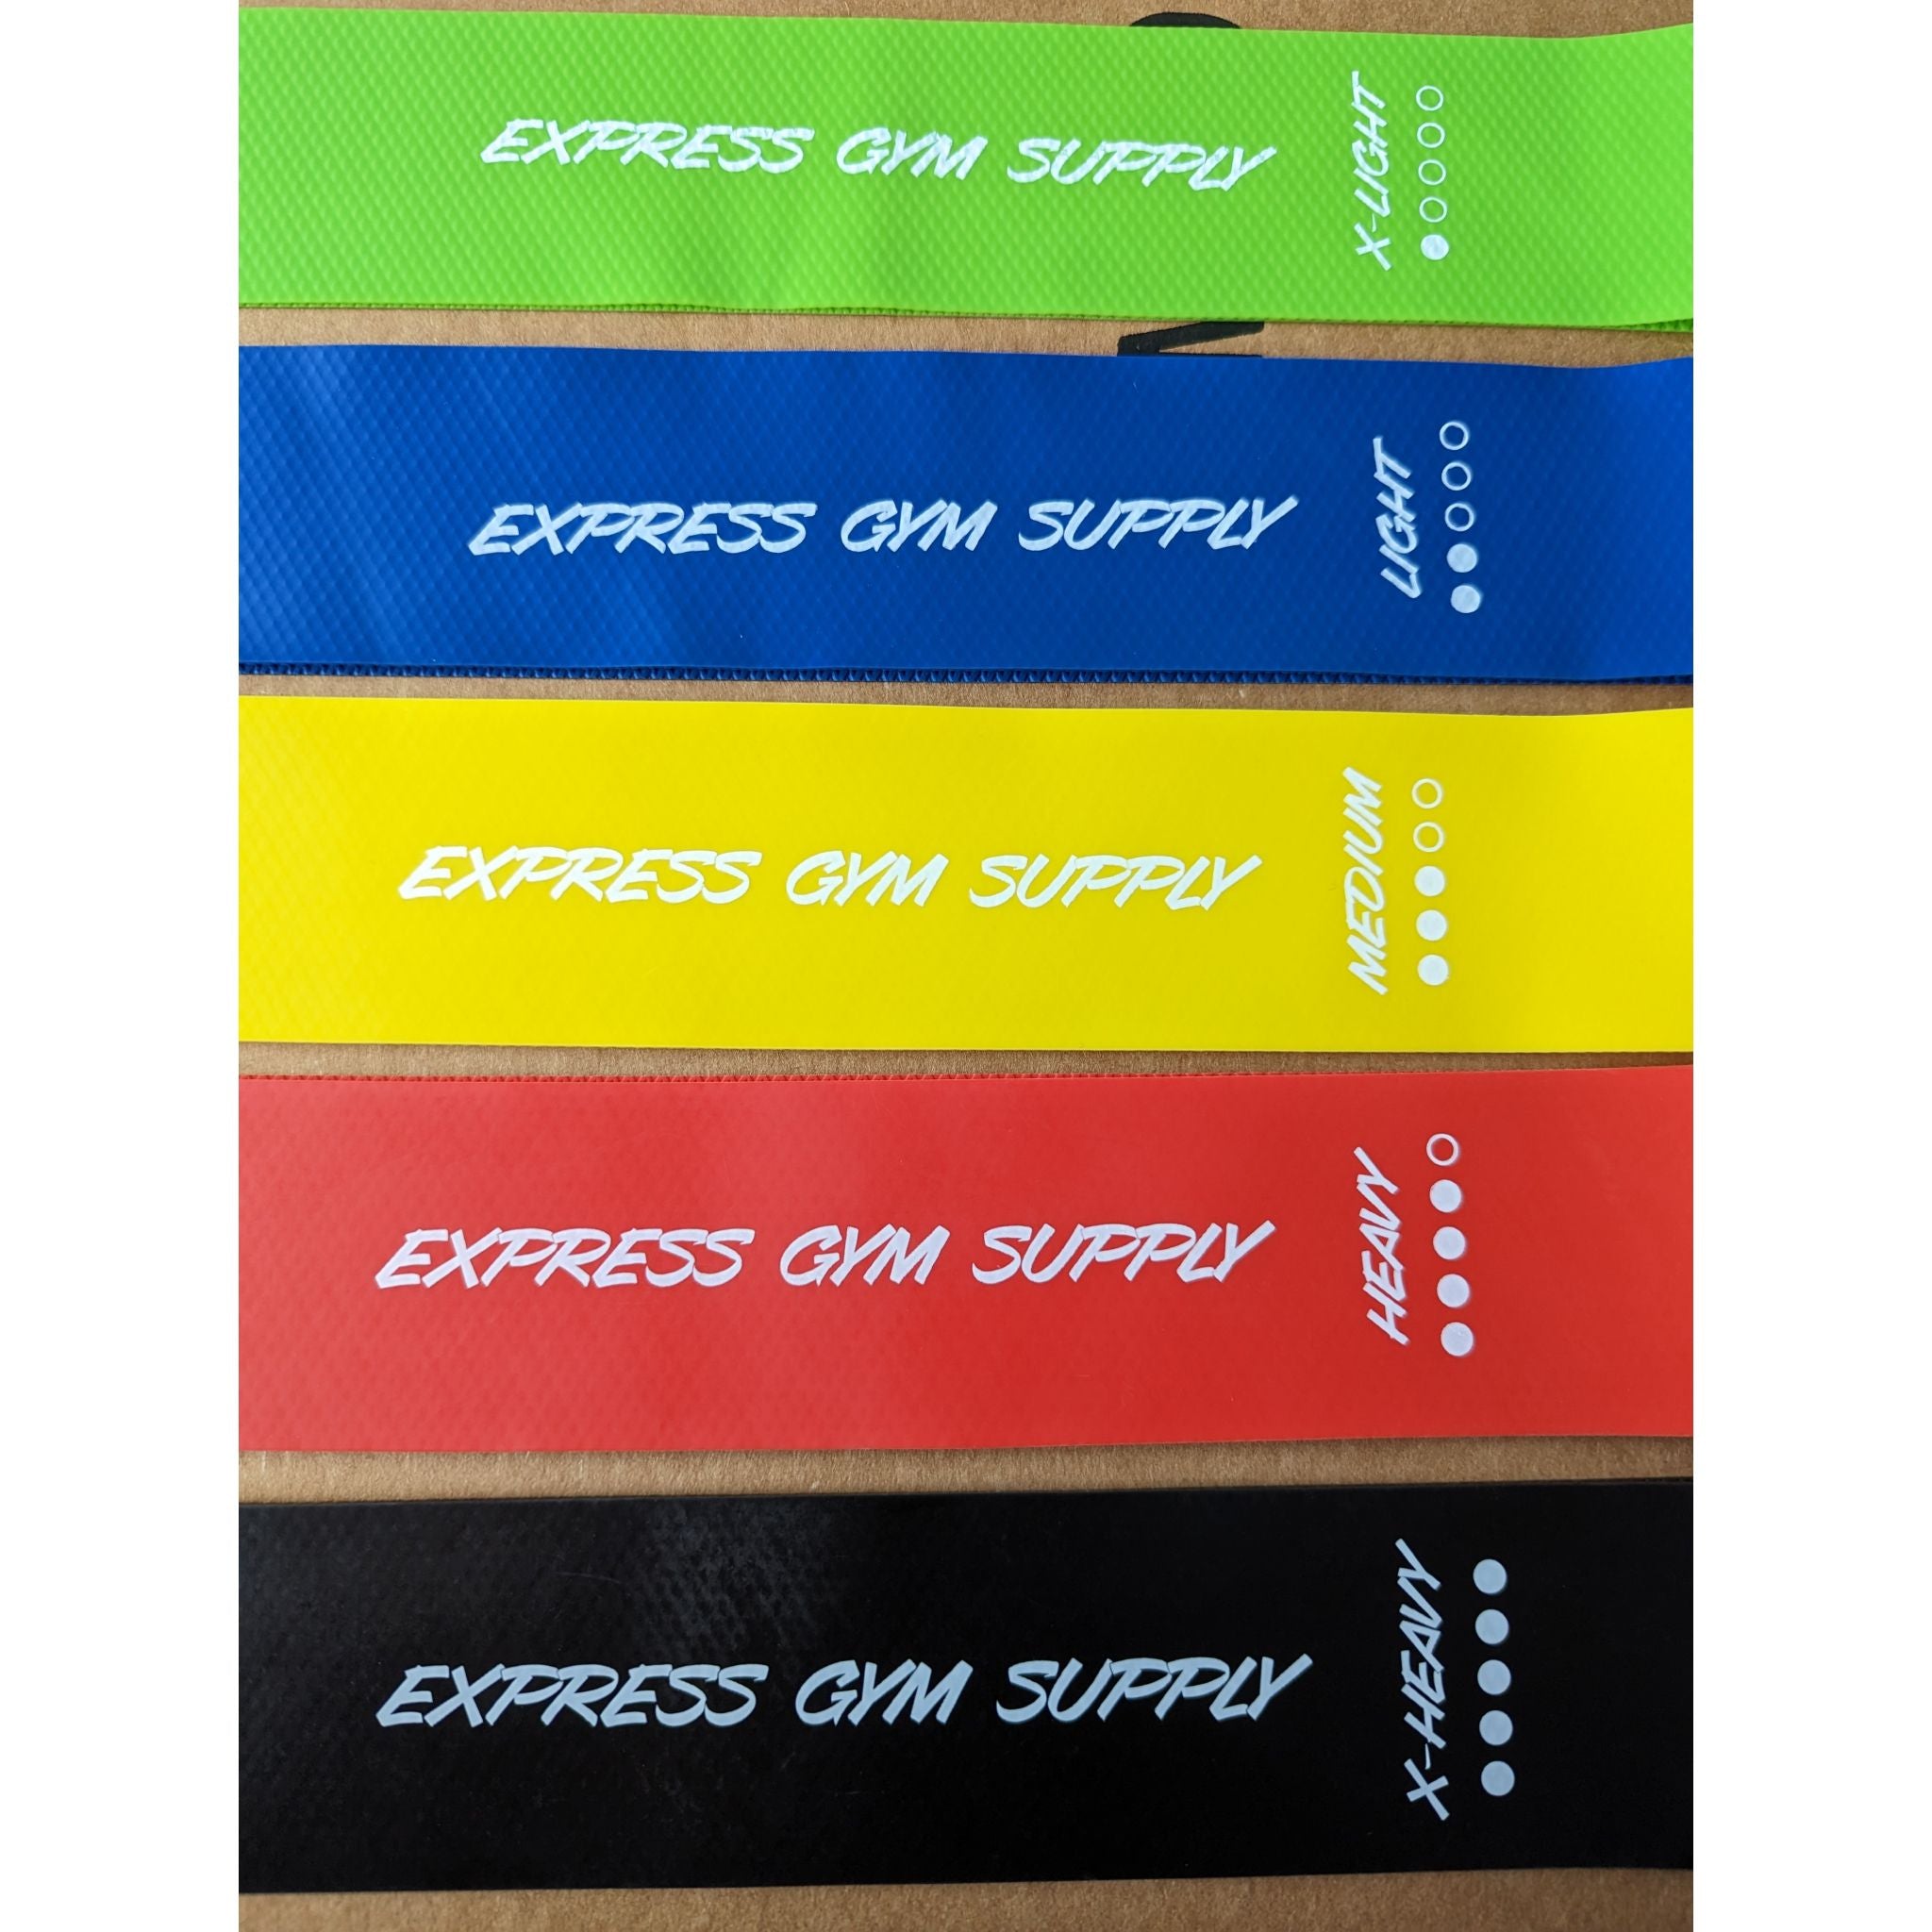 3D Grip Latex Resistance Band Set with Express Gym Supply Logo